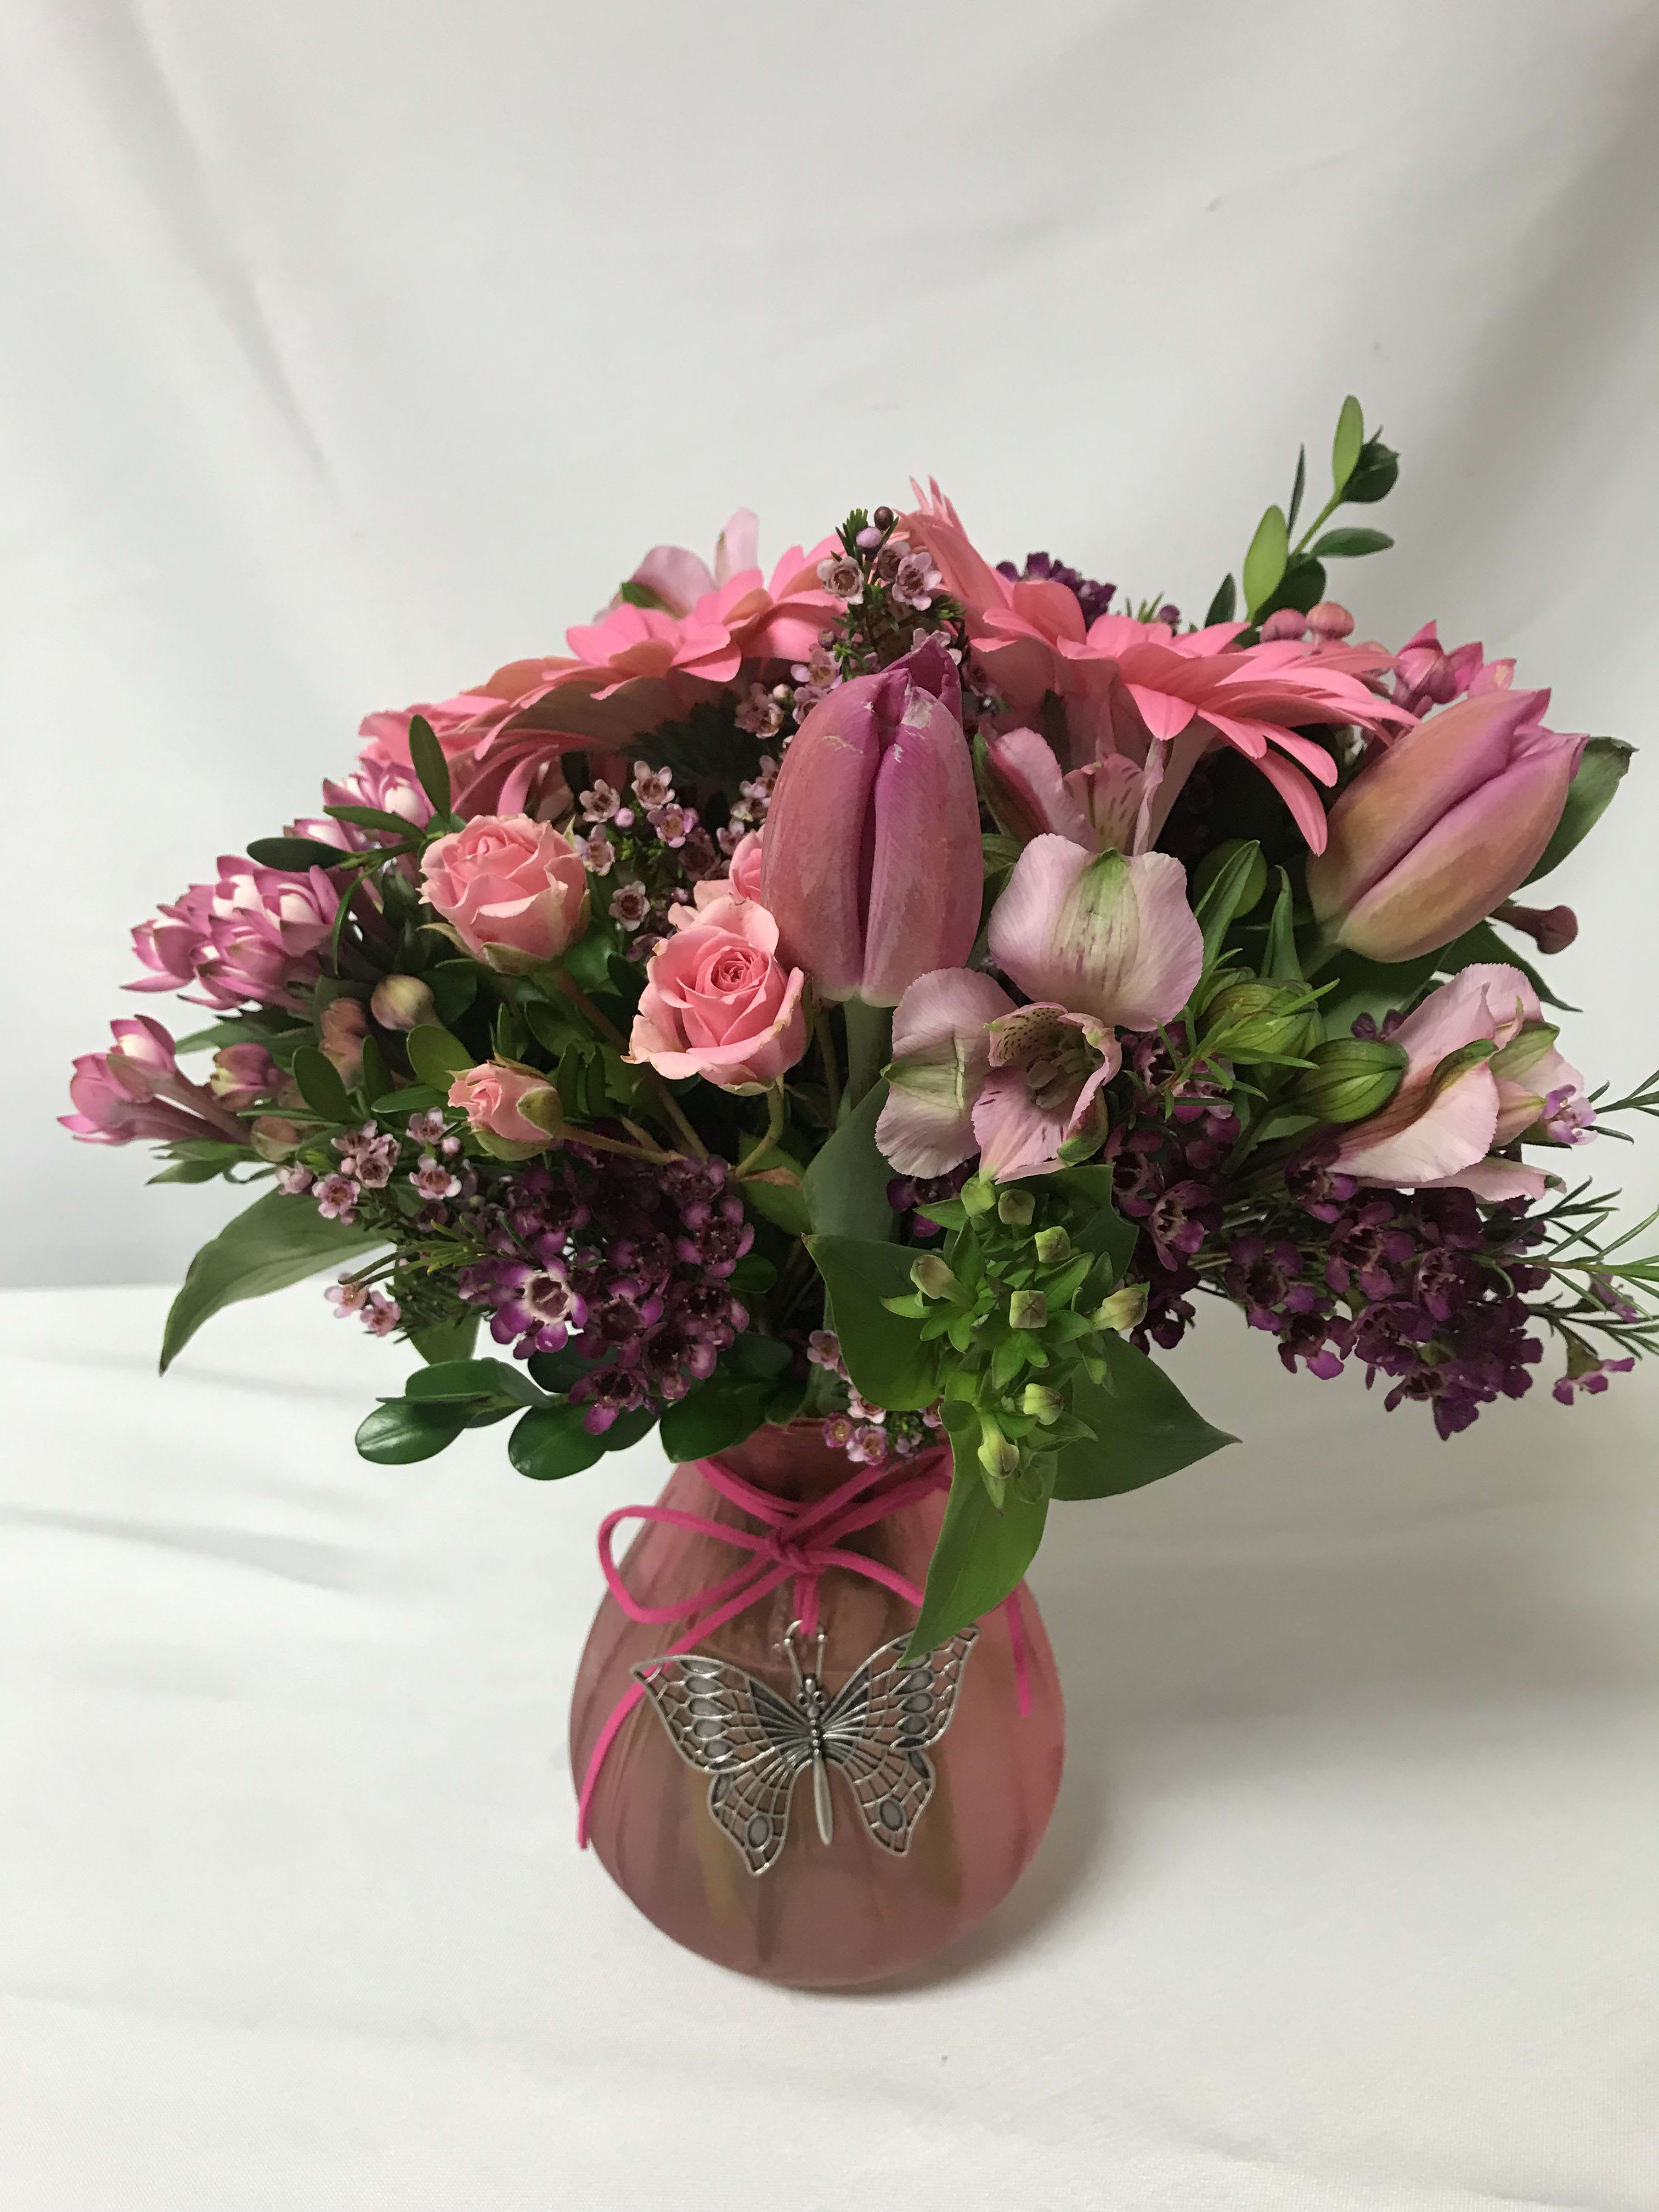 Pink Flood - A flood of pink with roses, Gerbers, and lilies.